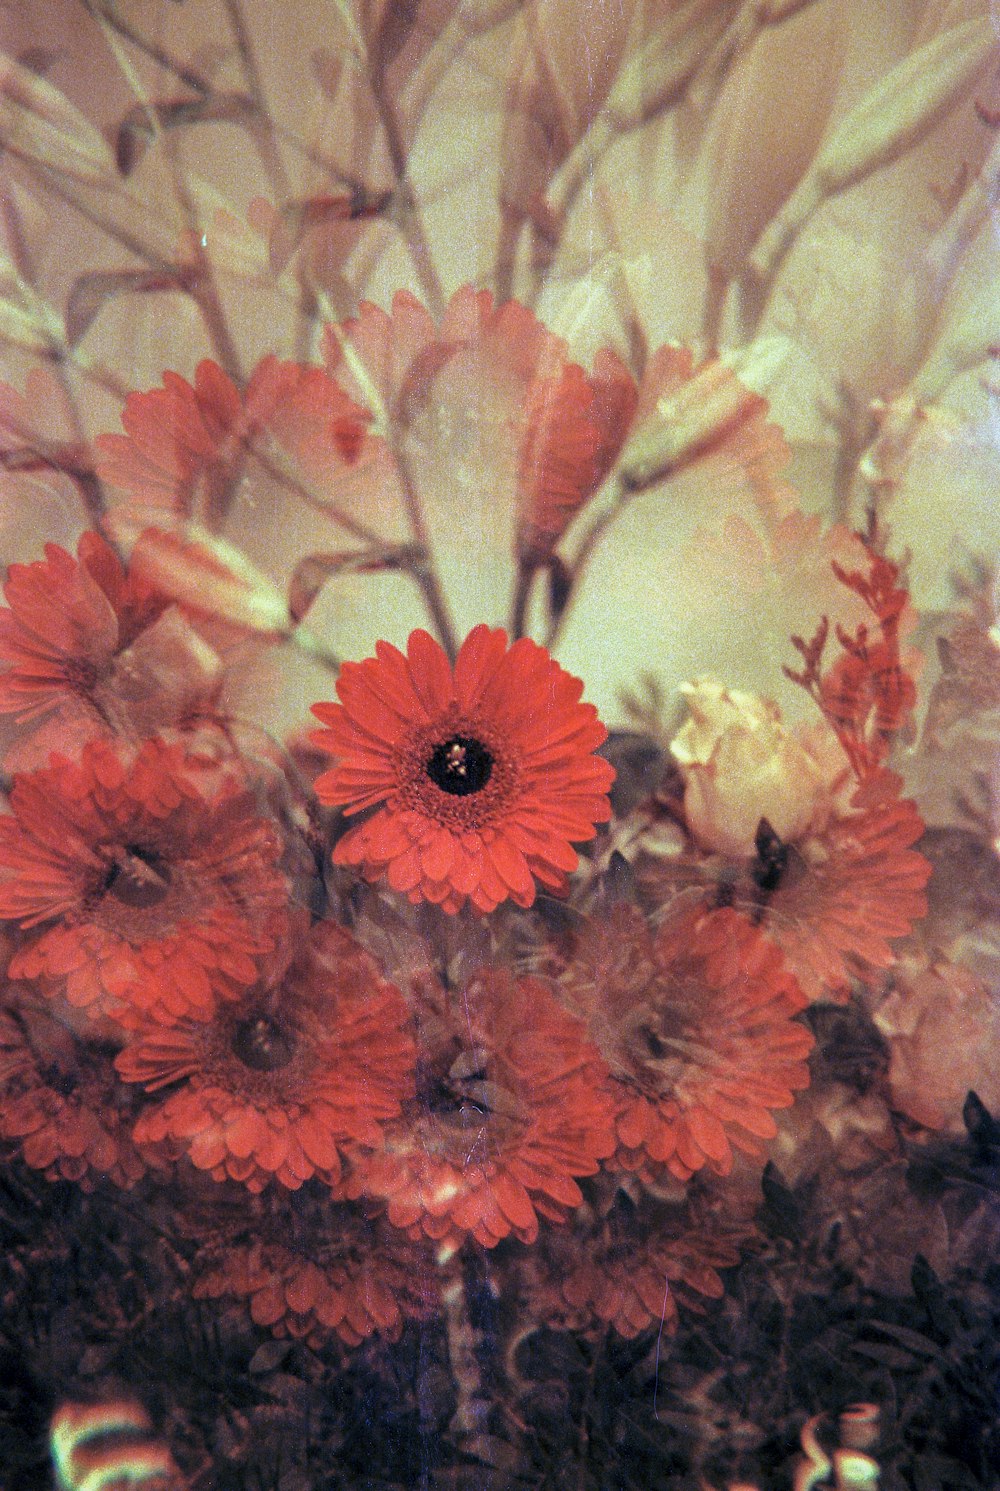 a bunch of red and white flowers in a vase